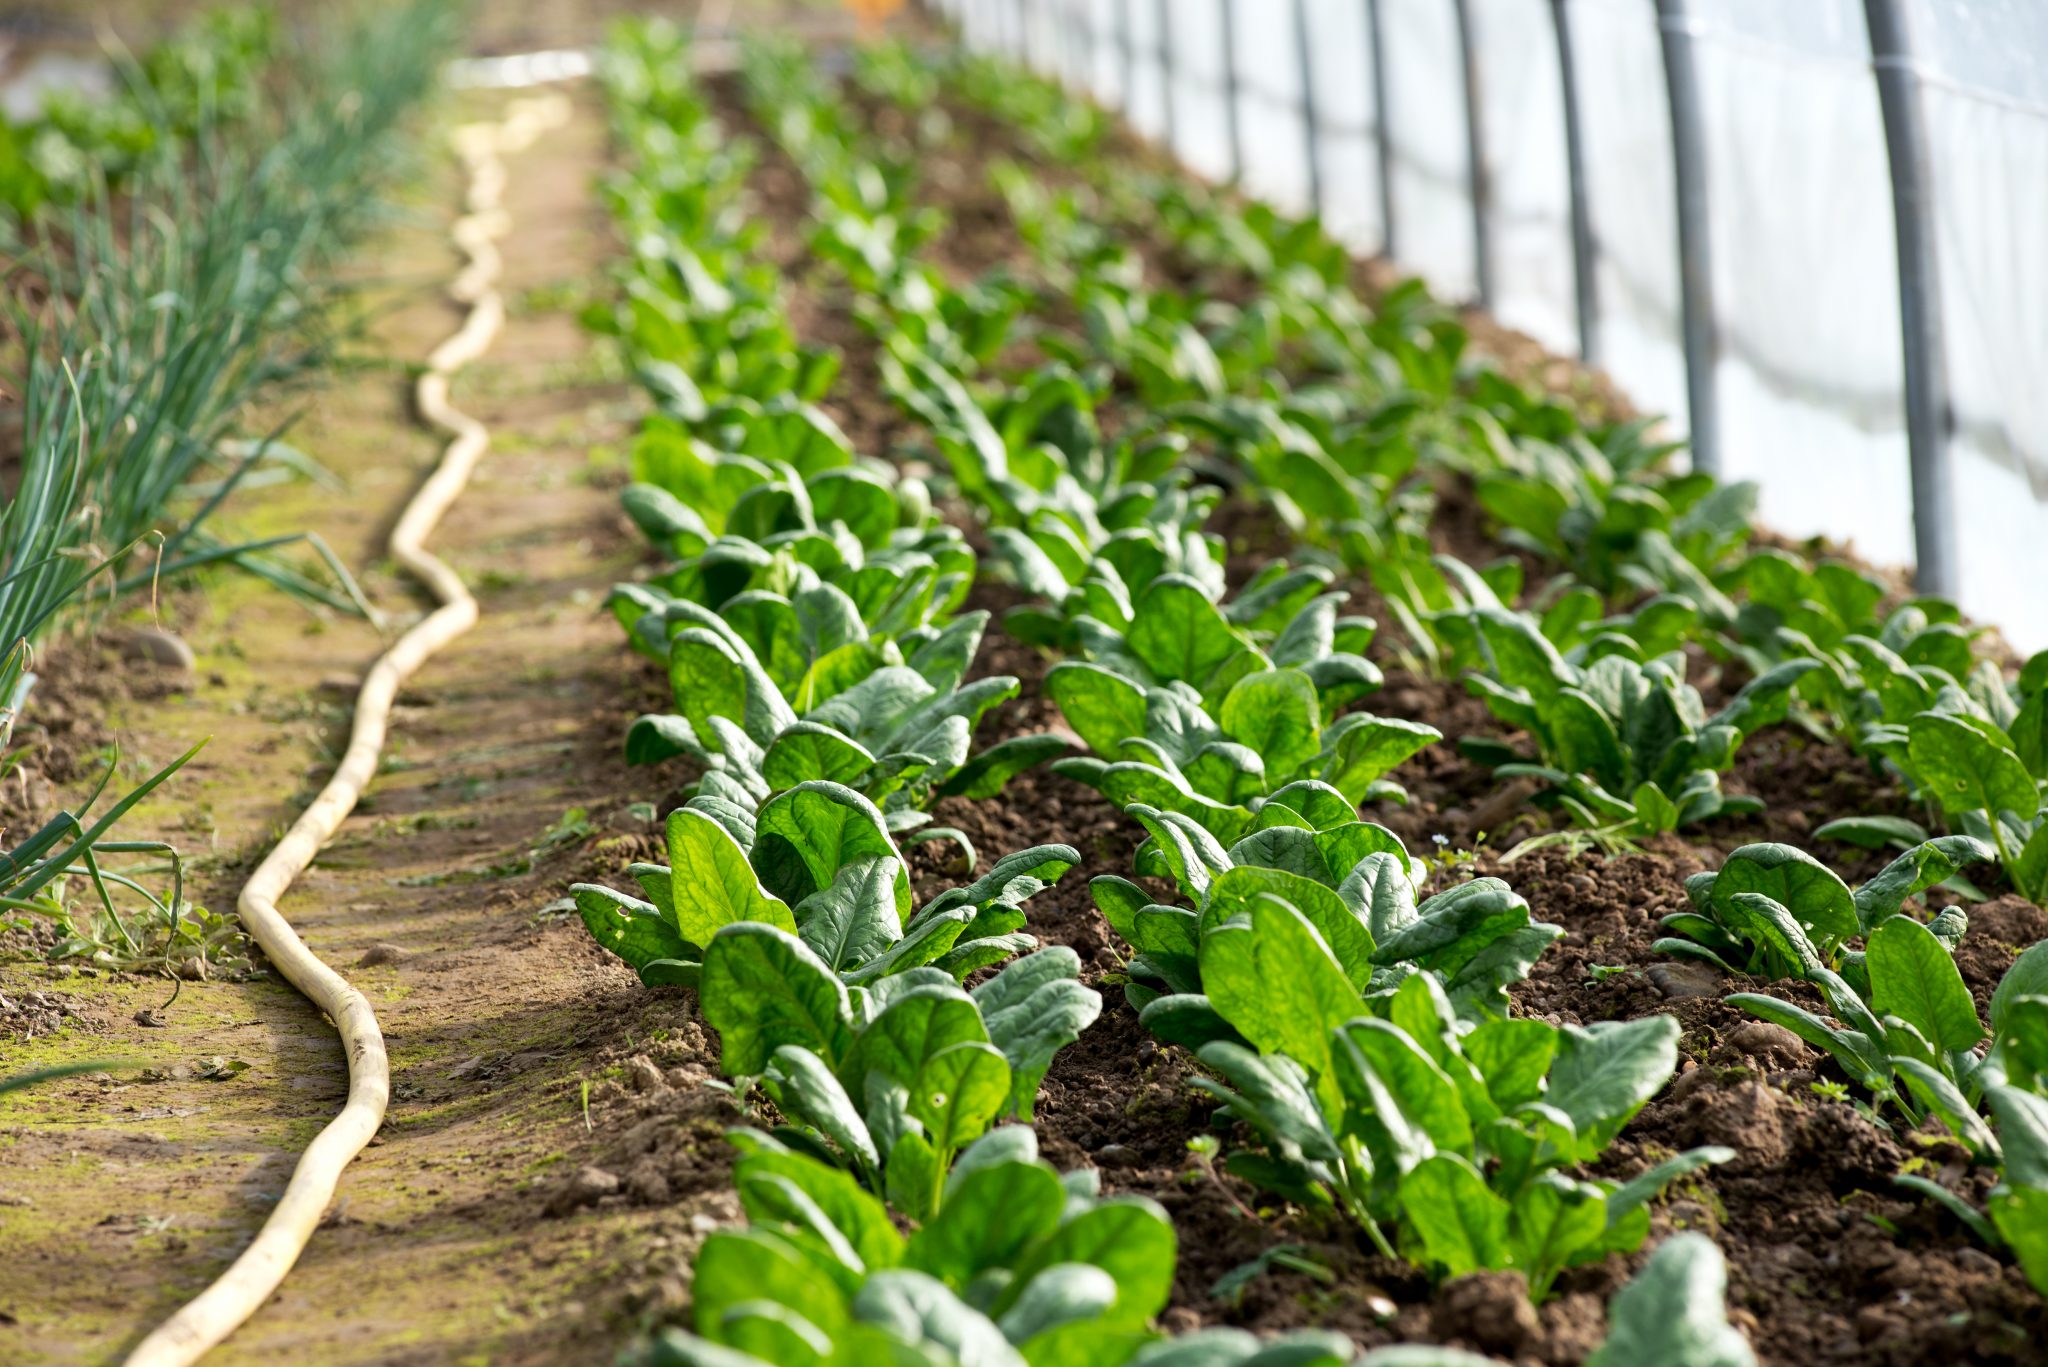 Rows of little spinach growing in greenhouse